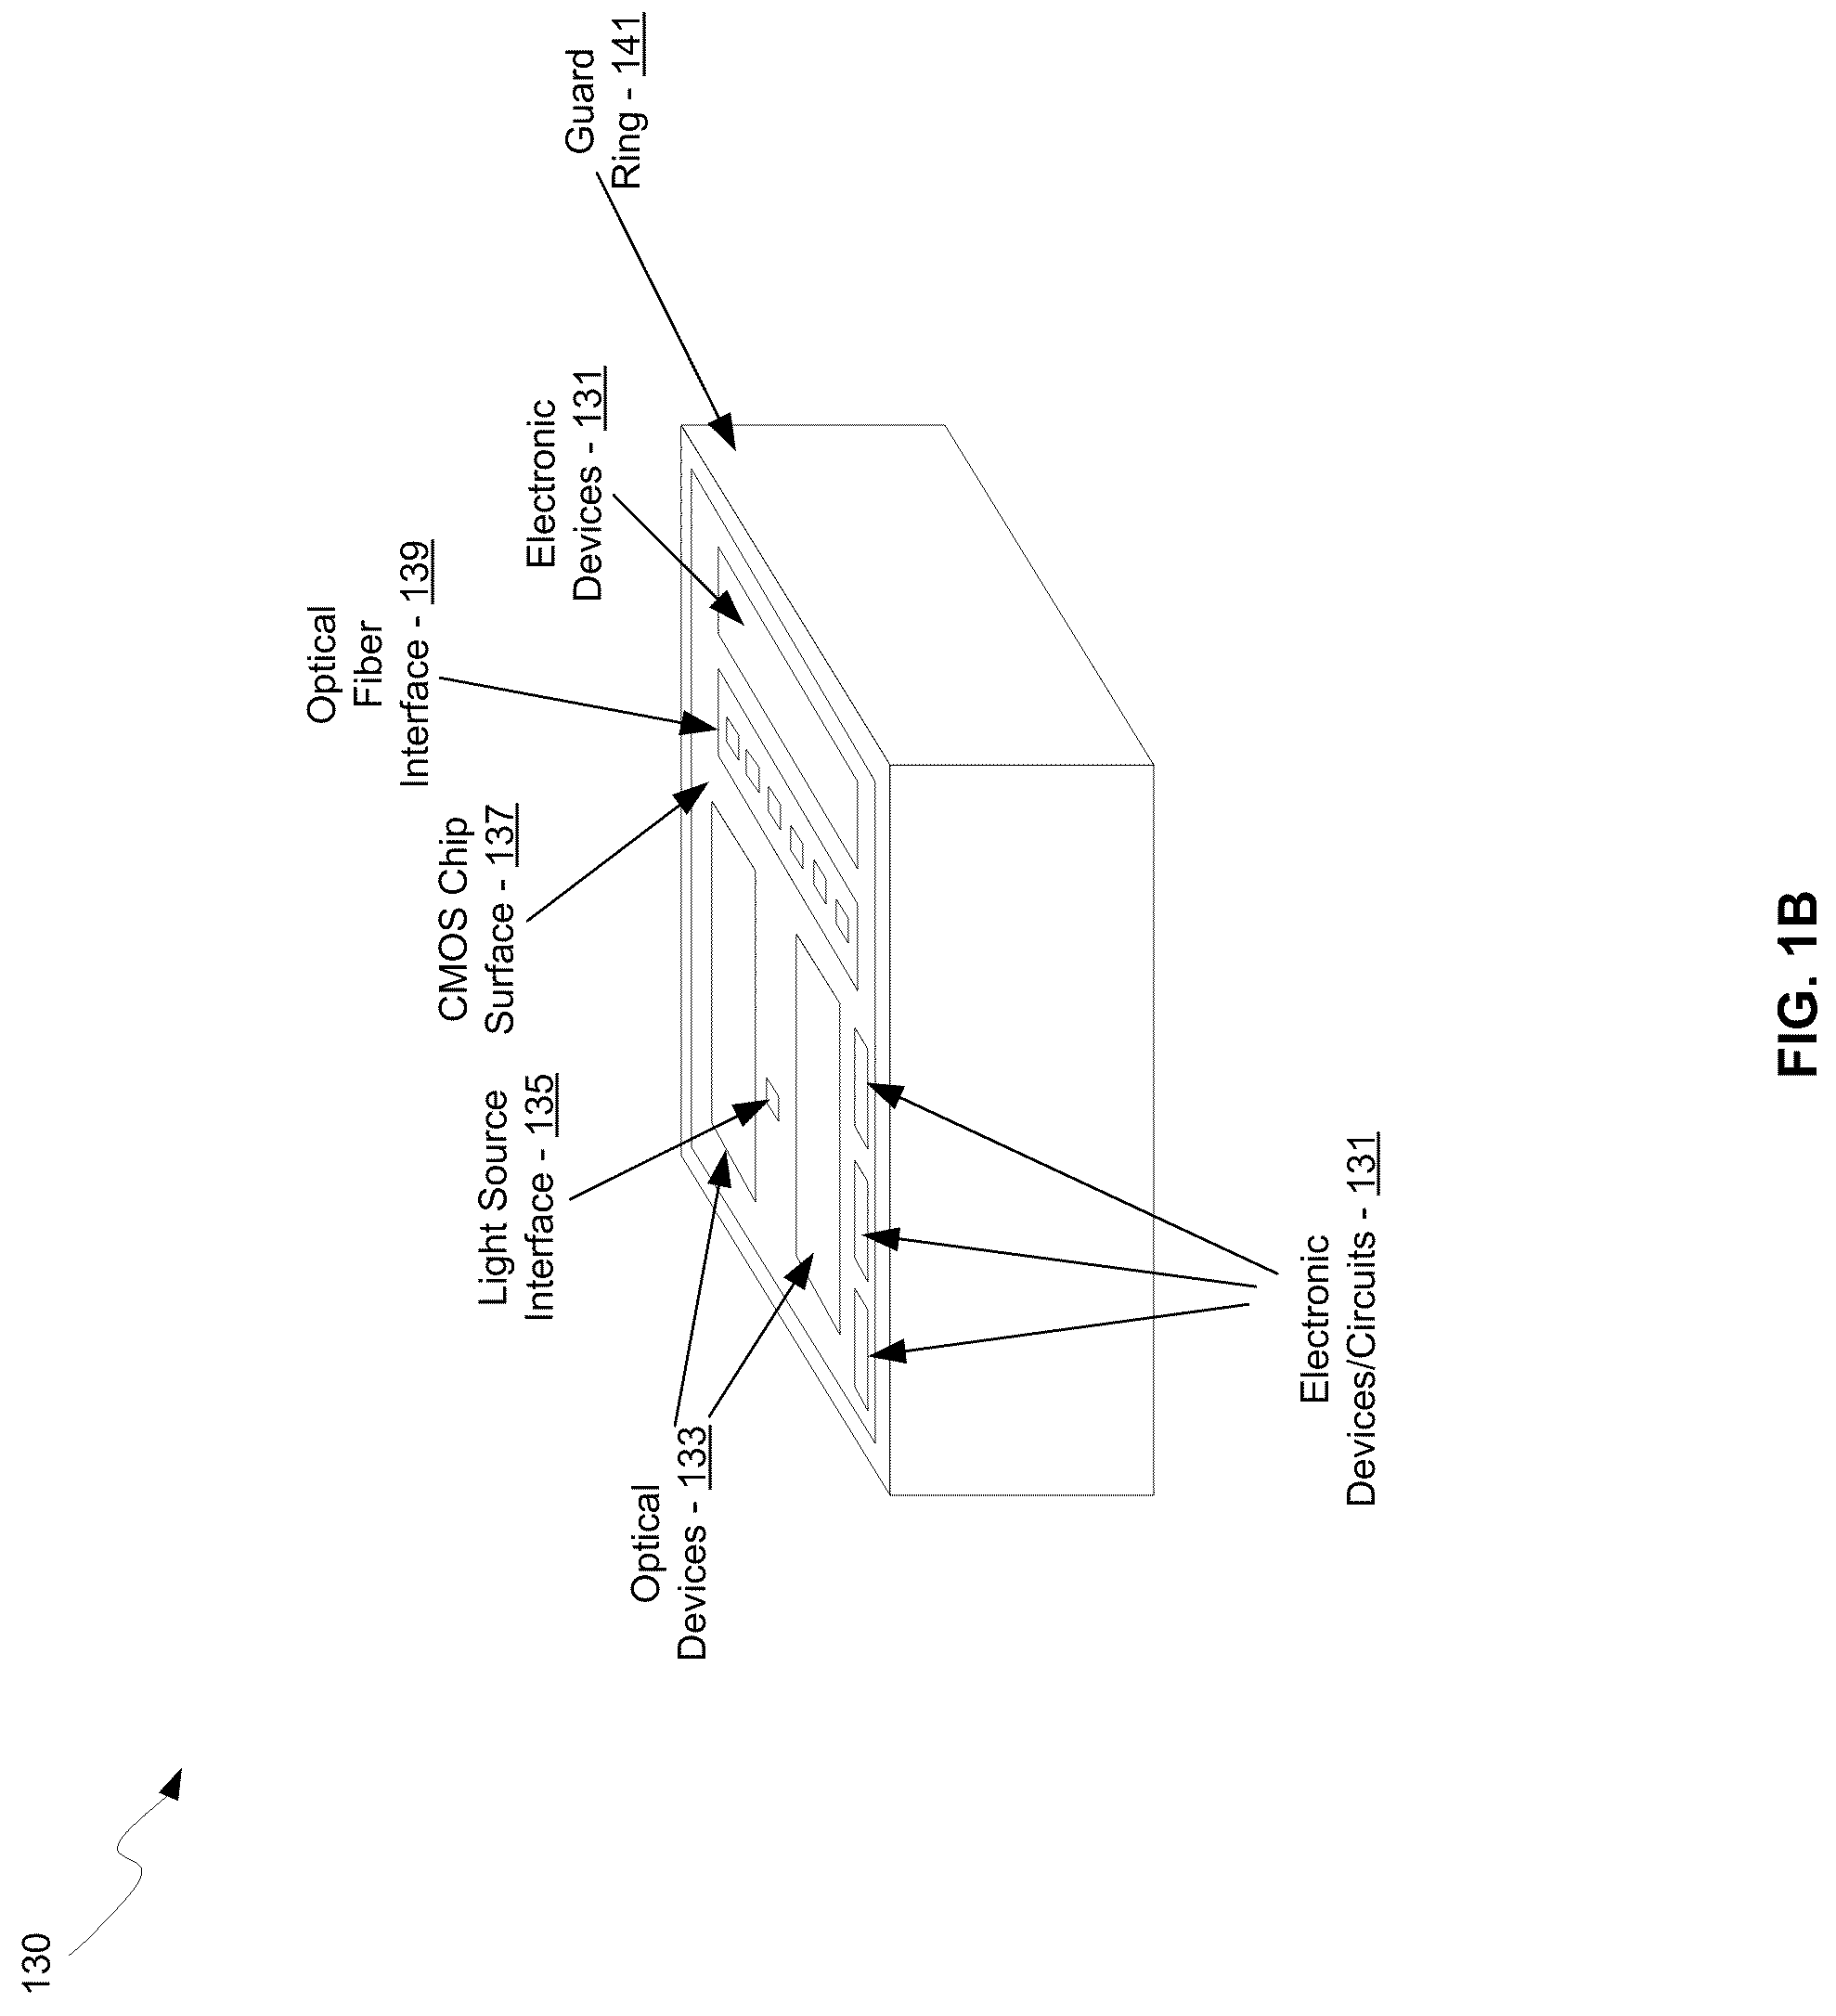 Method and system for a narrowband, non-linear optoelectronic receiver